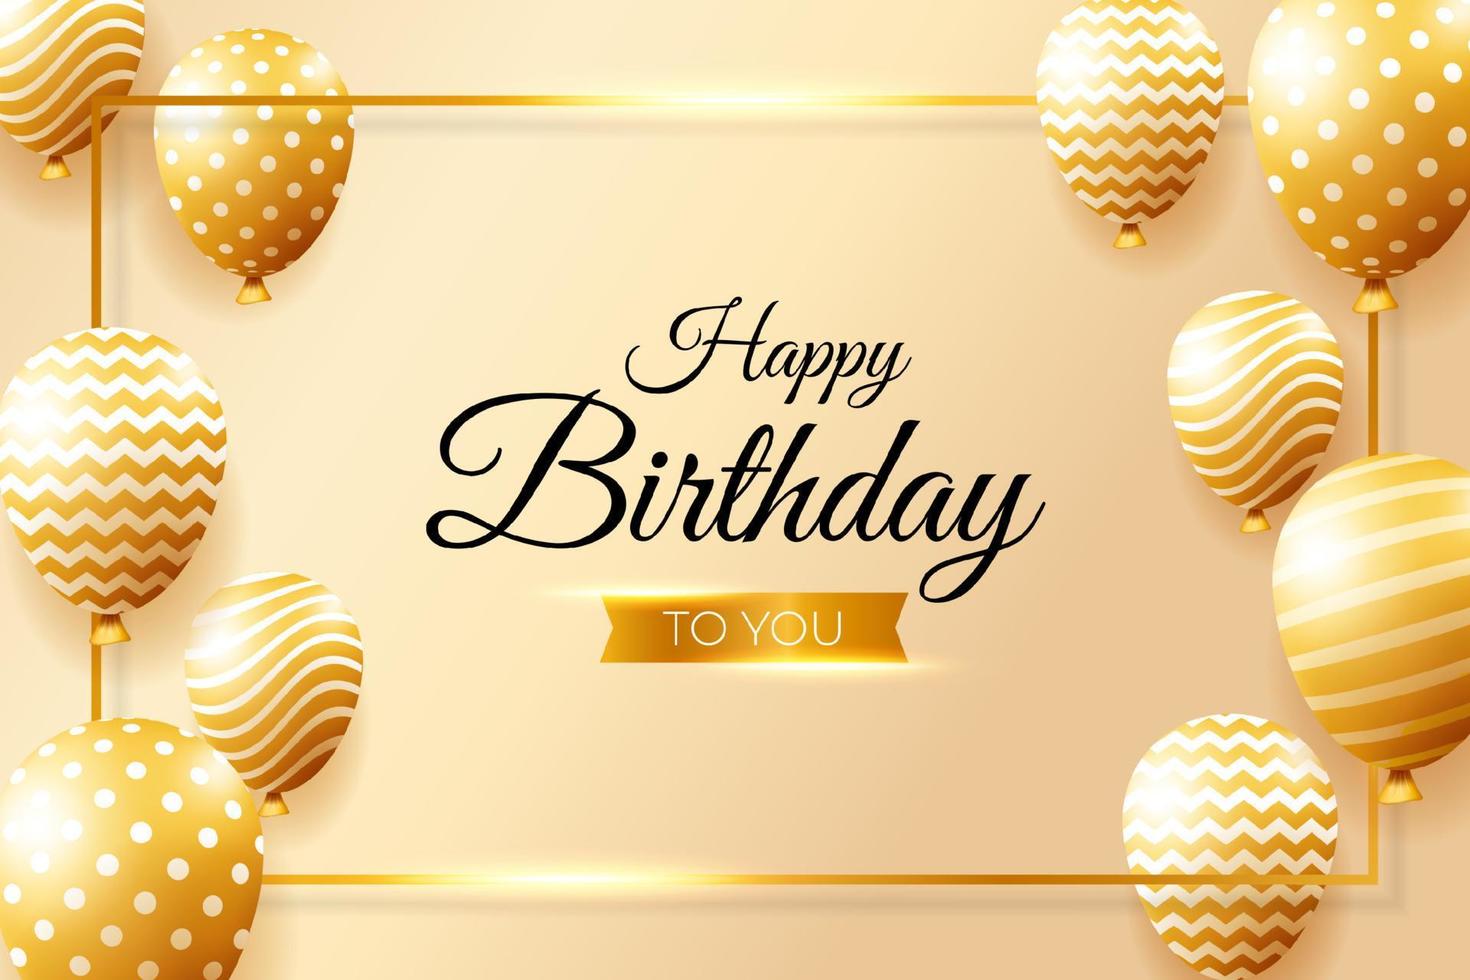 Happy Birthday Background Design Graphic by ngabeivector  Creative Fabrica